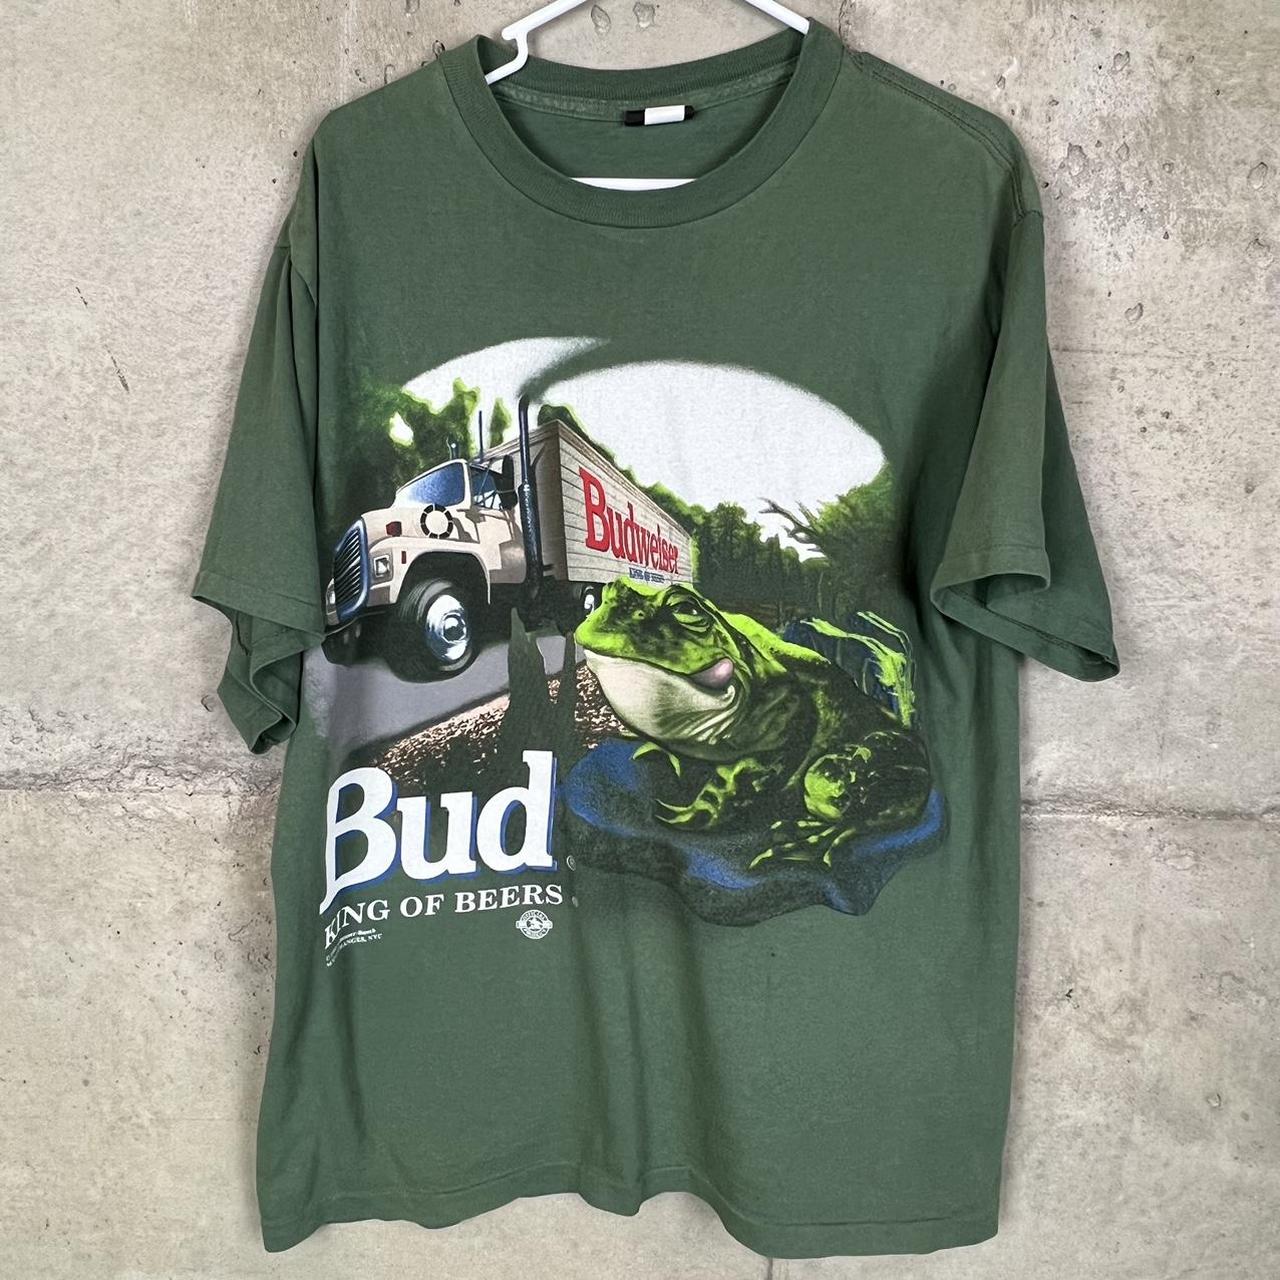 vintage 1995 Budweiser “this bud’s for you” single... - Depop